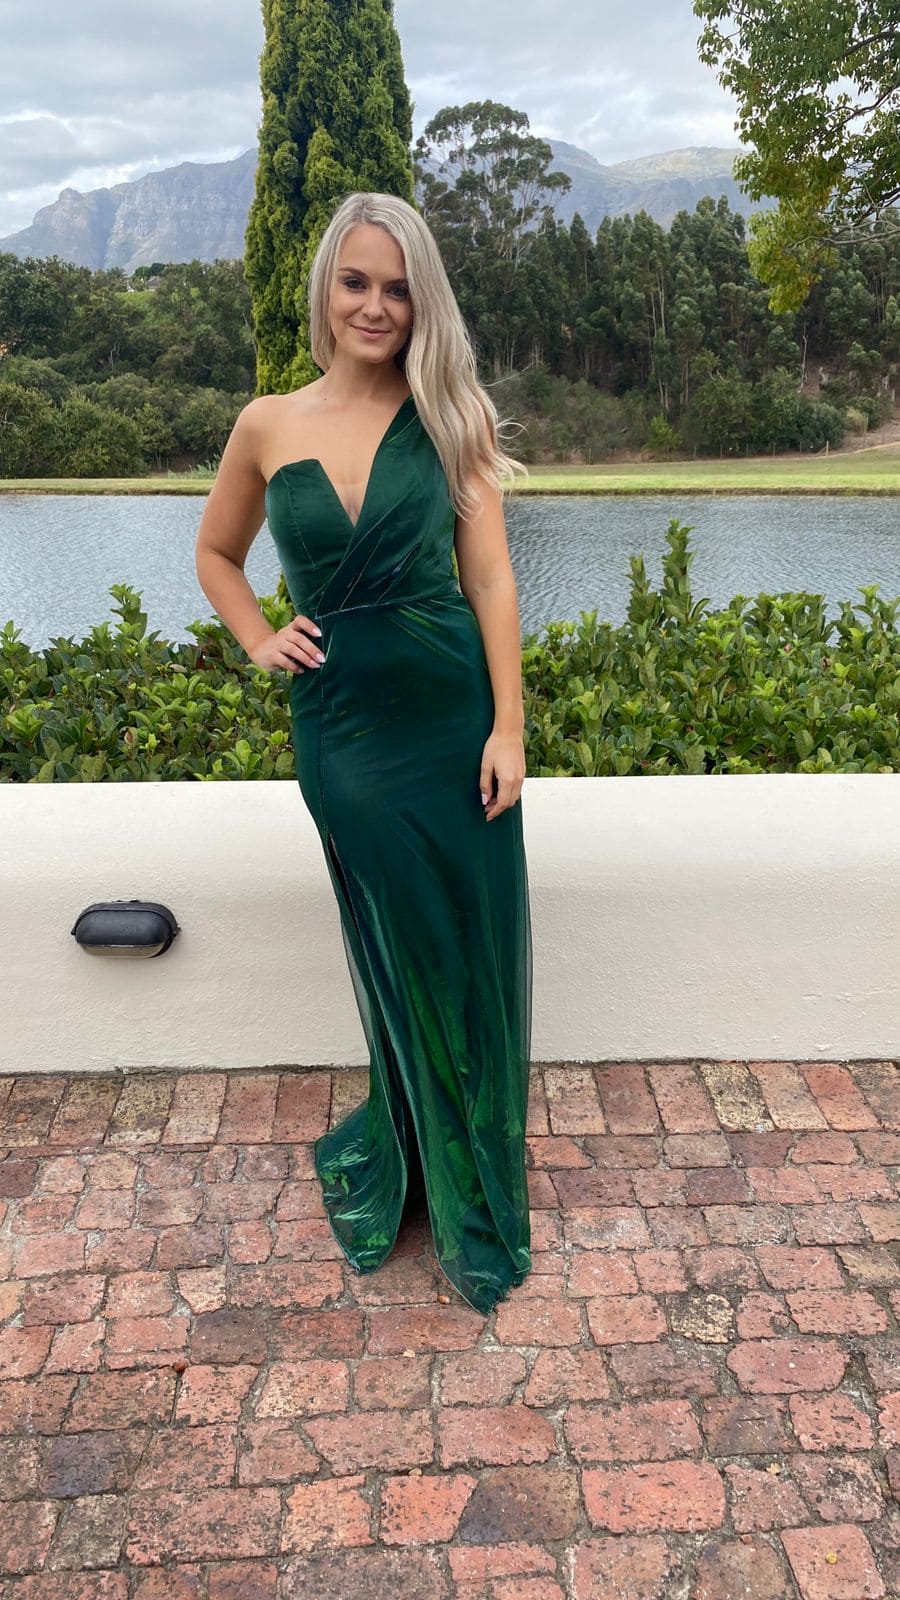 A woman in a green dress poses in front of a lake.